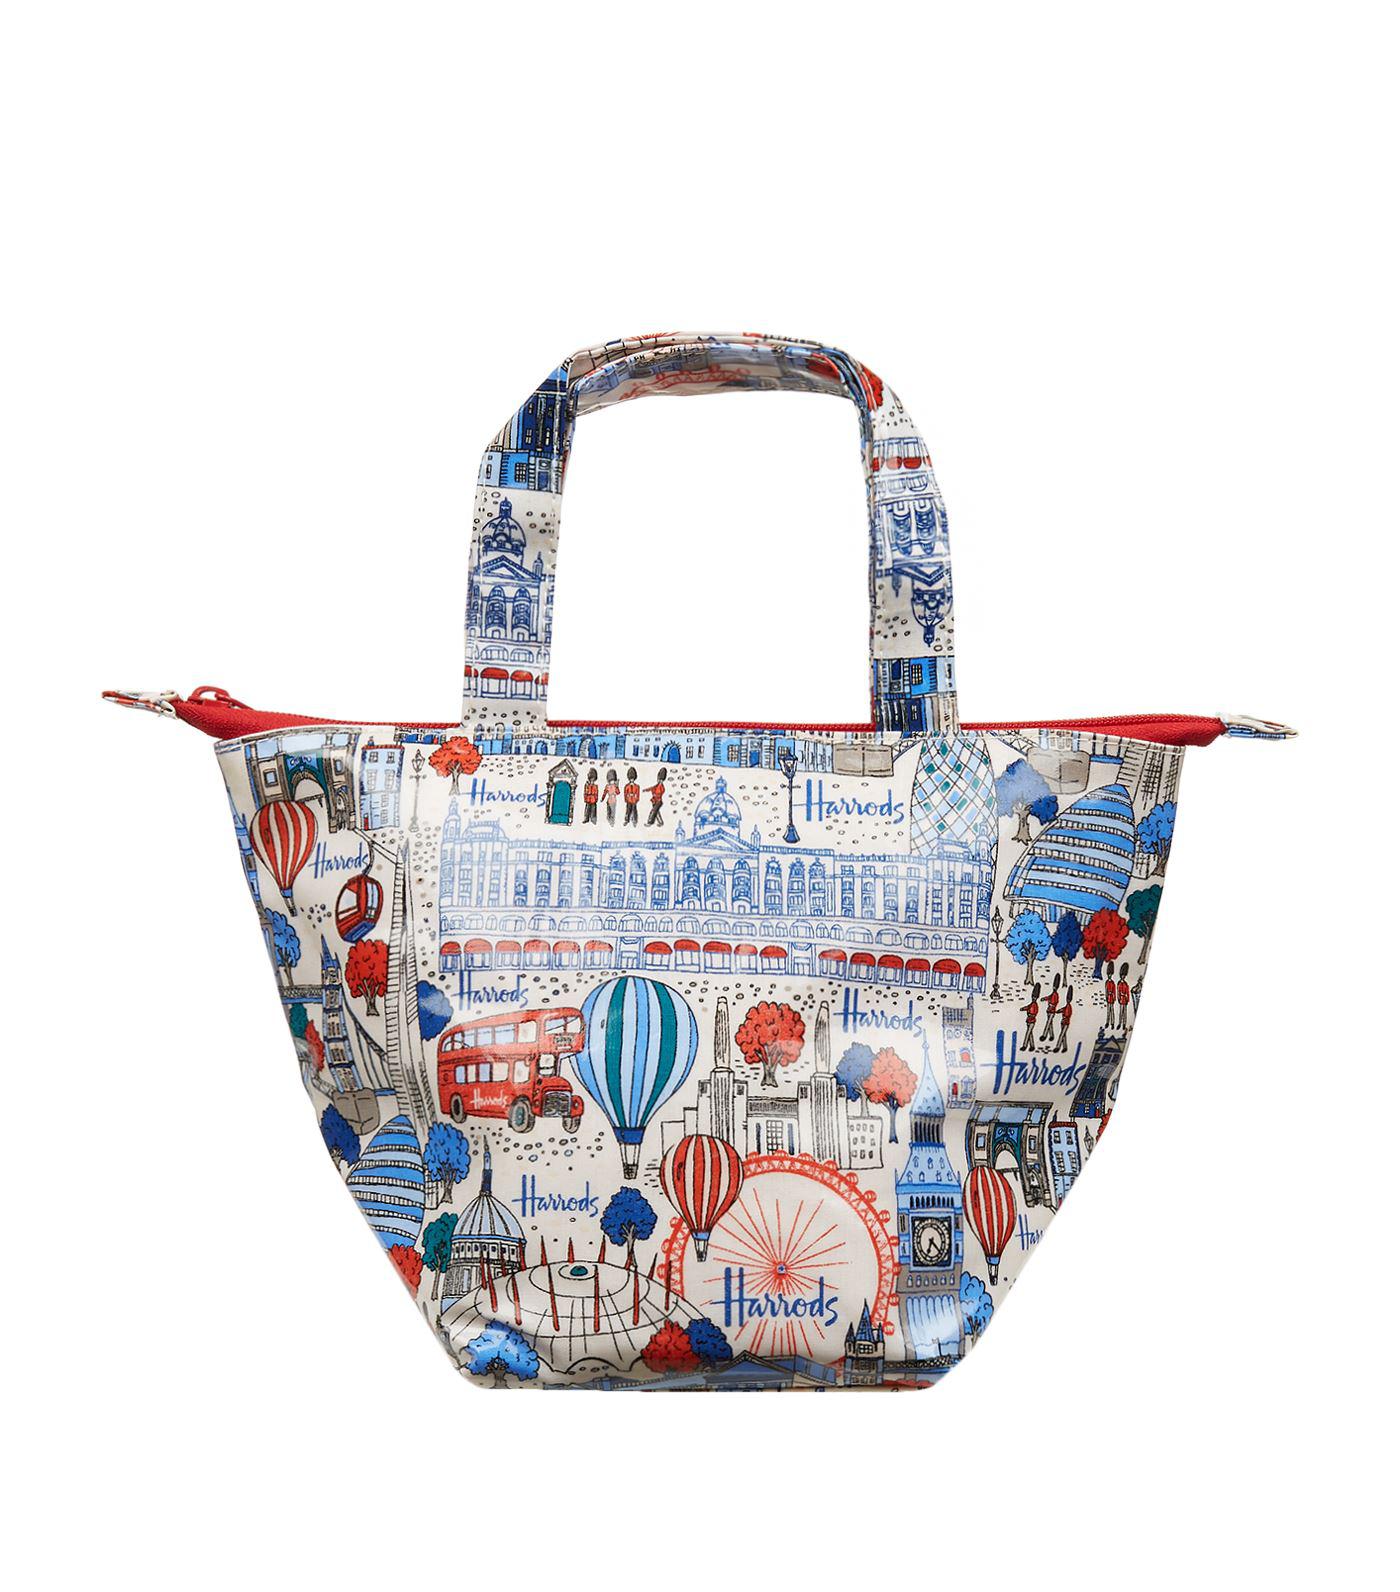 Harrods Cotton Pretty City Insulated Lunch Tote in Blue - Lyst